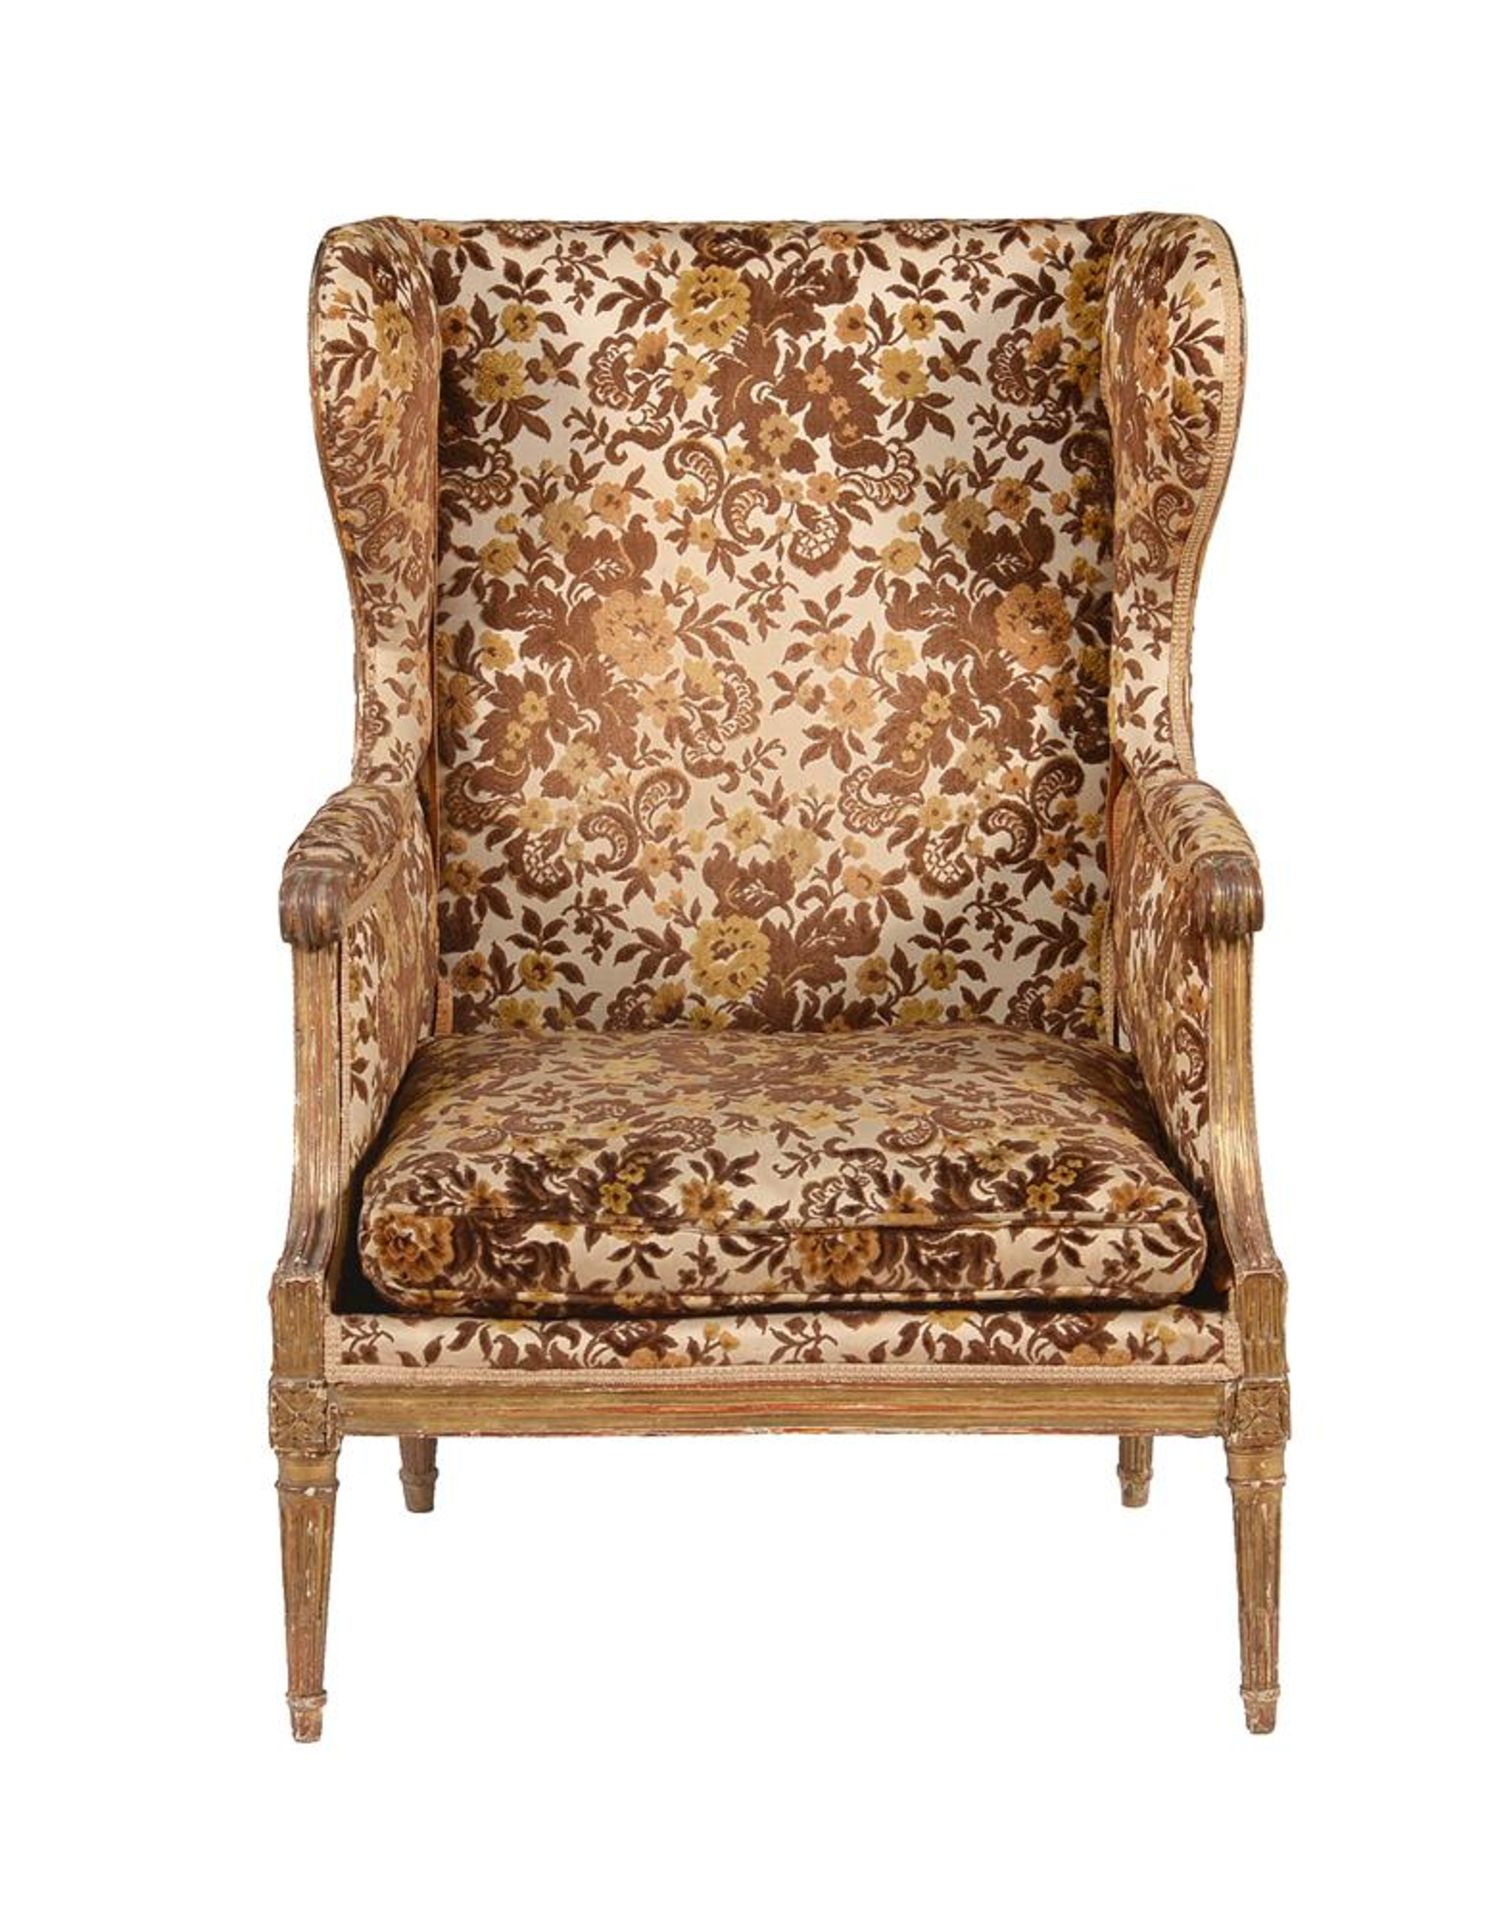 A Louis XVI giltwood and upholstered bergere armchair - Image 2 of 2